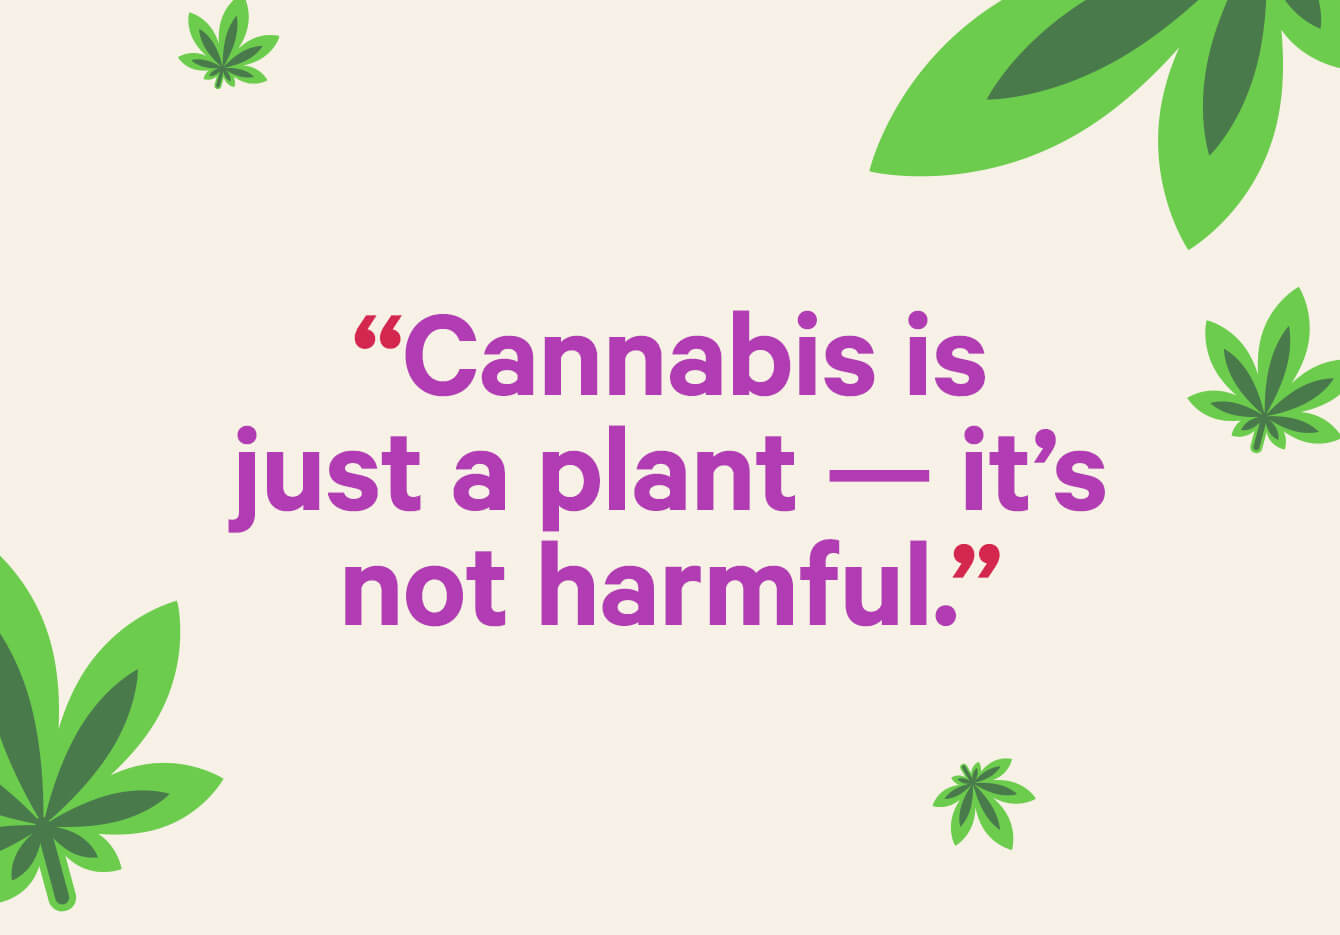 Question: Cannabis is just a plant — it’s not harmful.